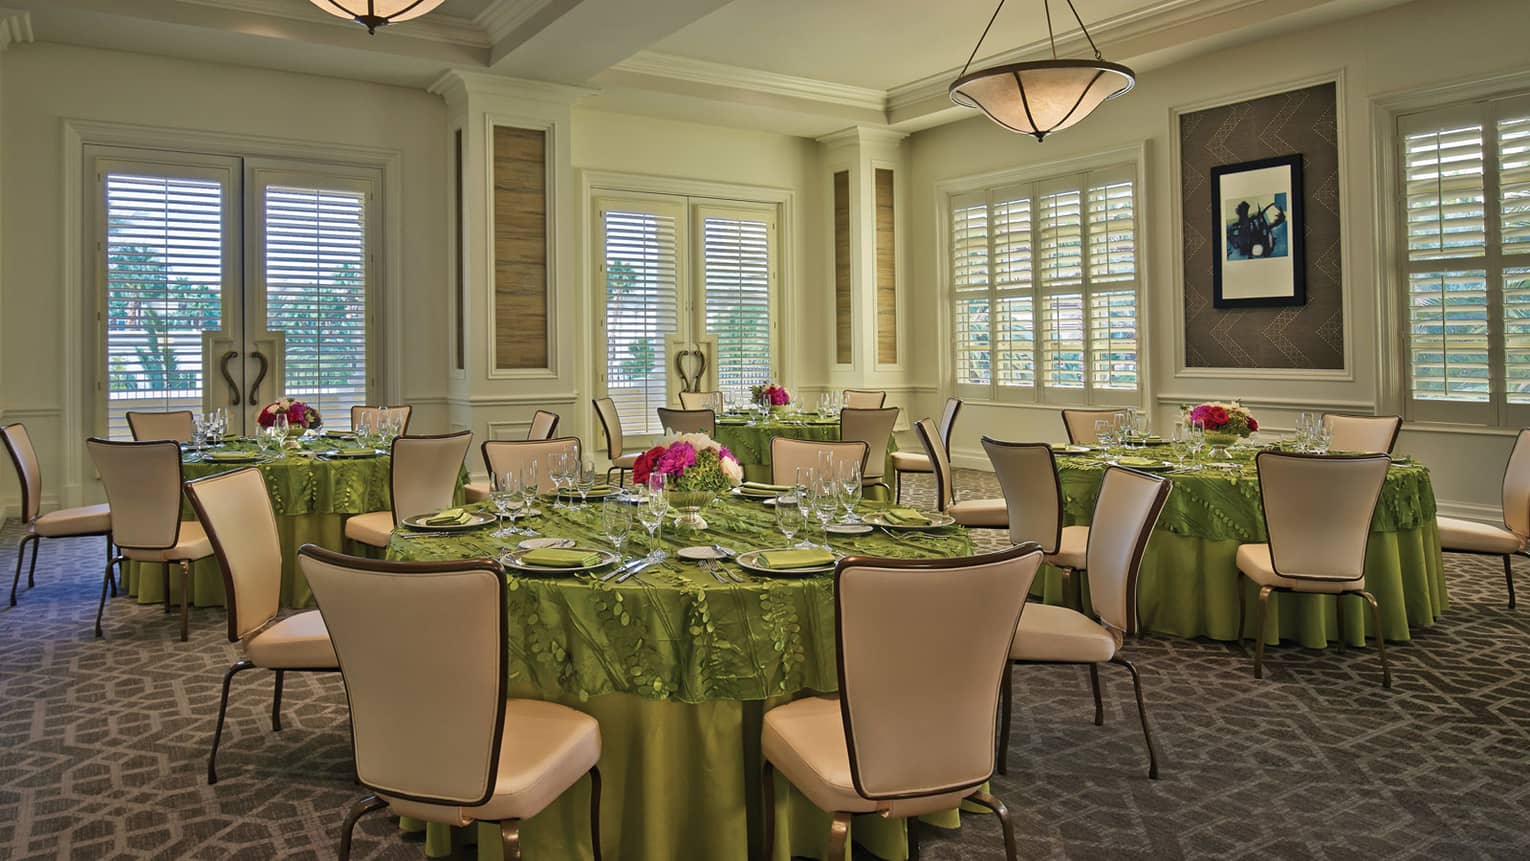 Mesquite Room with small round dining tables with green linens 